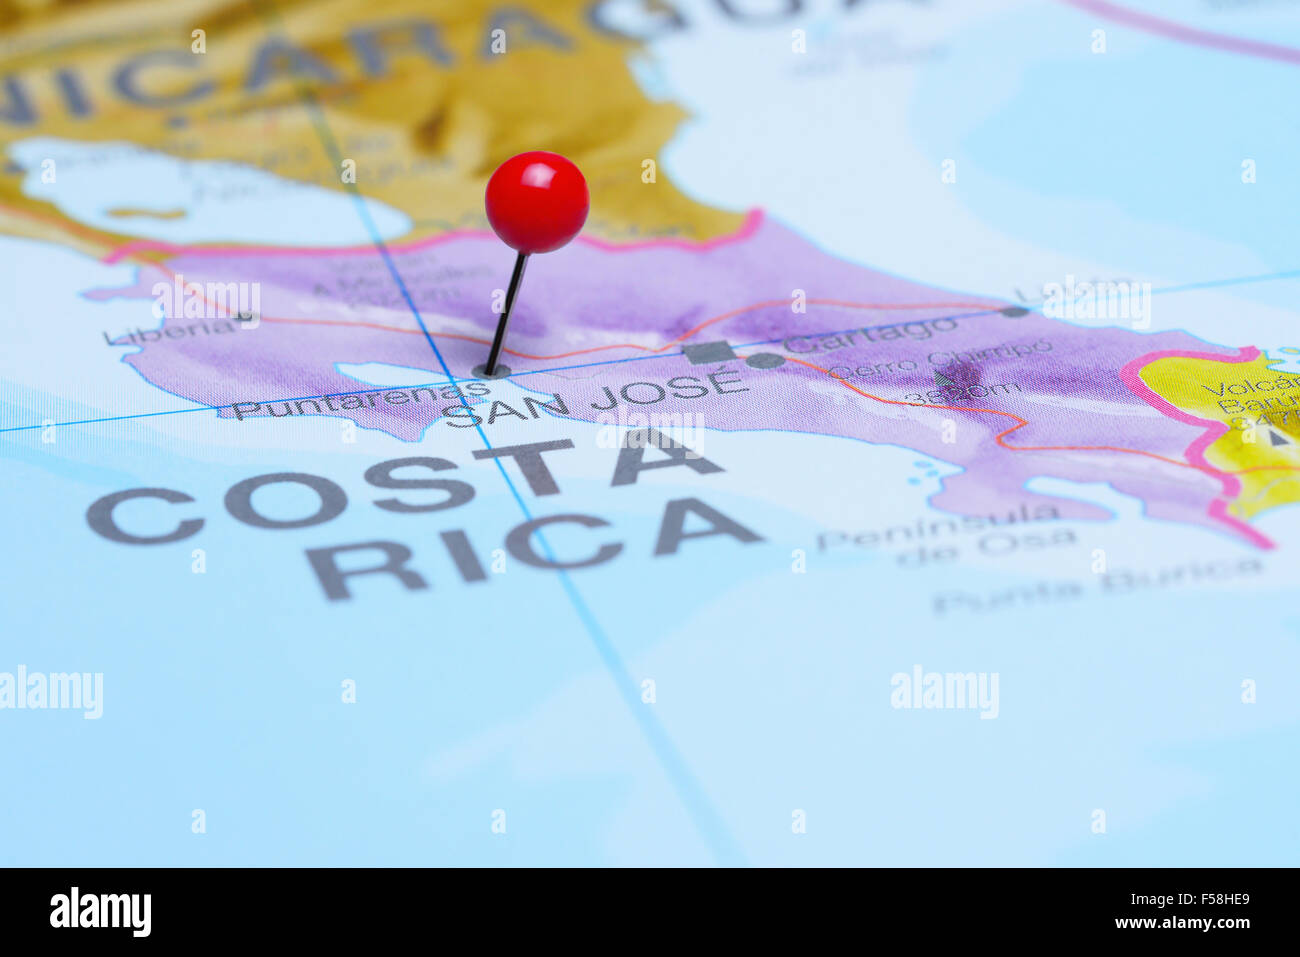 Puntarenas pinned on a map of America Stock Photo